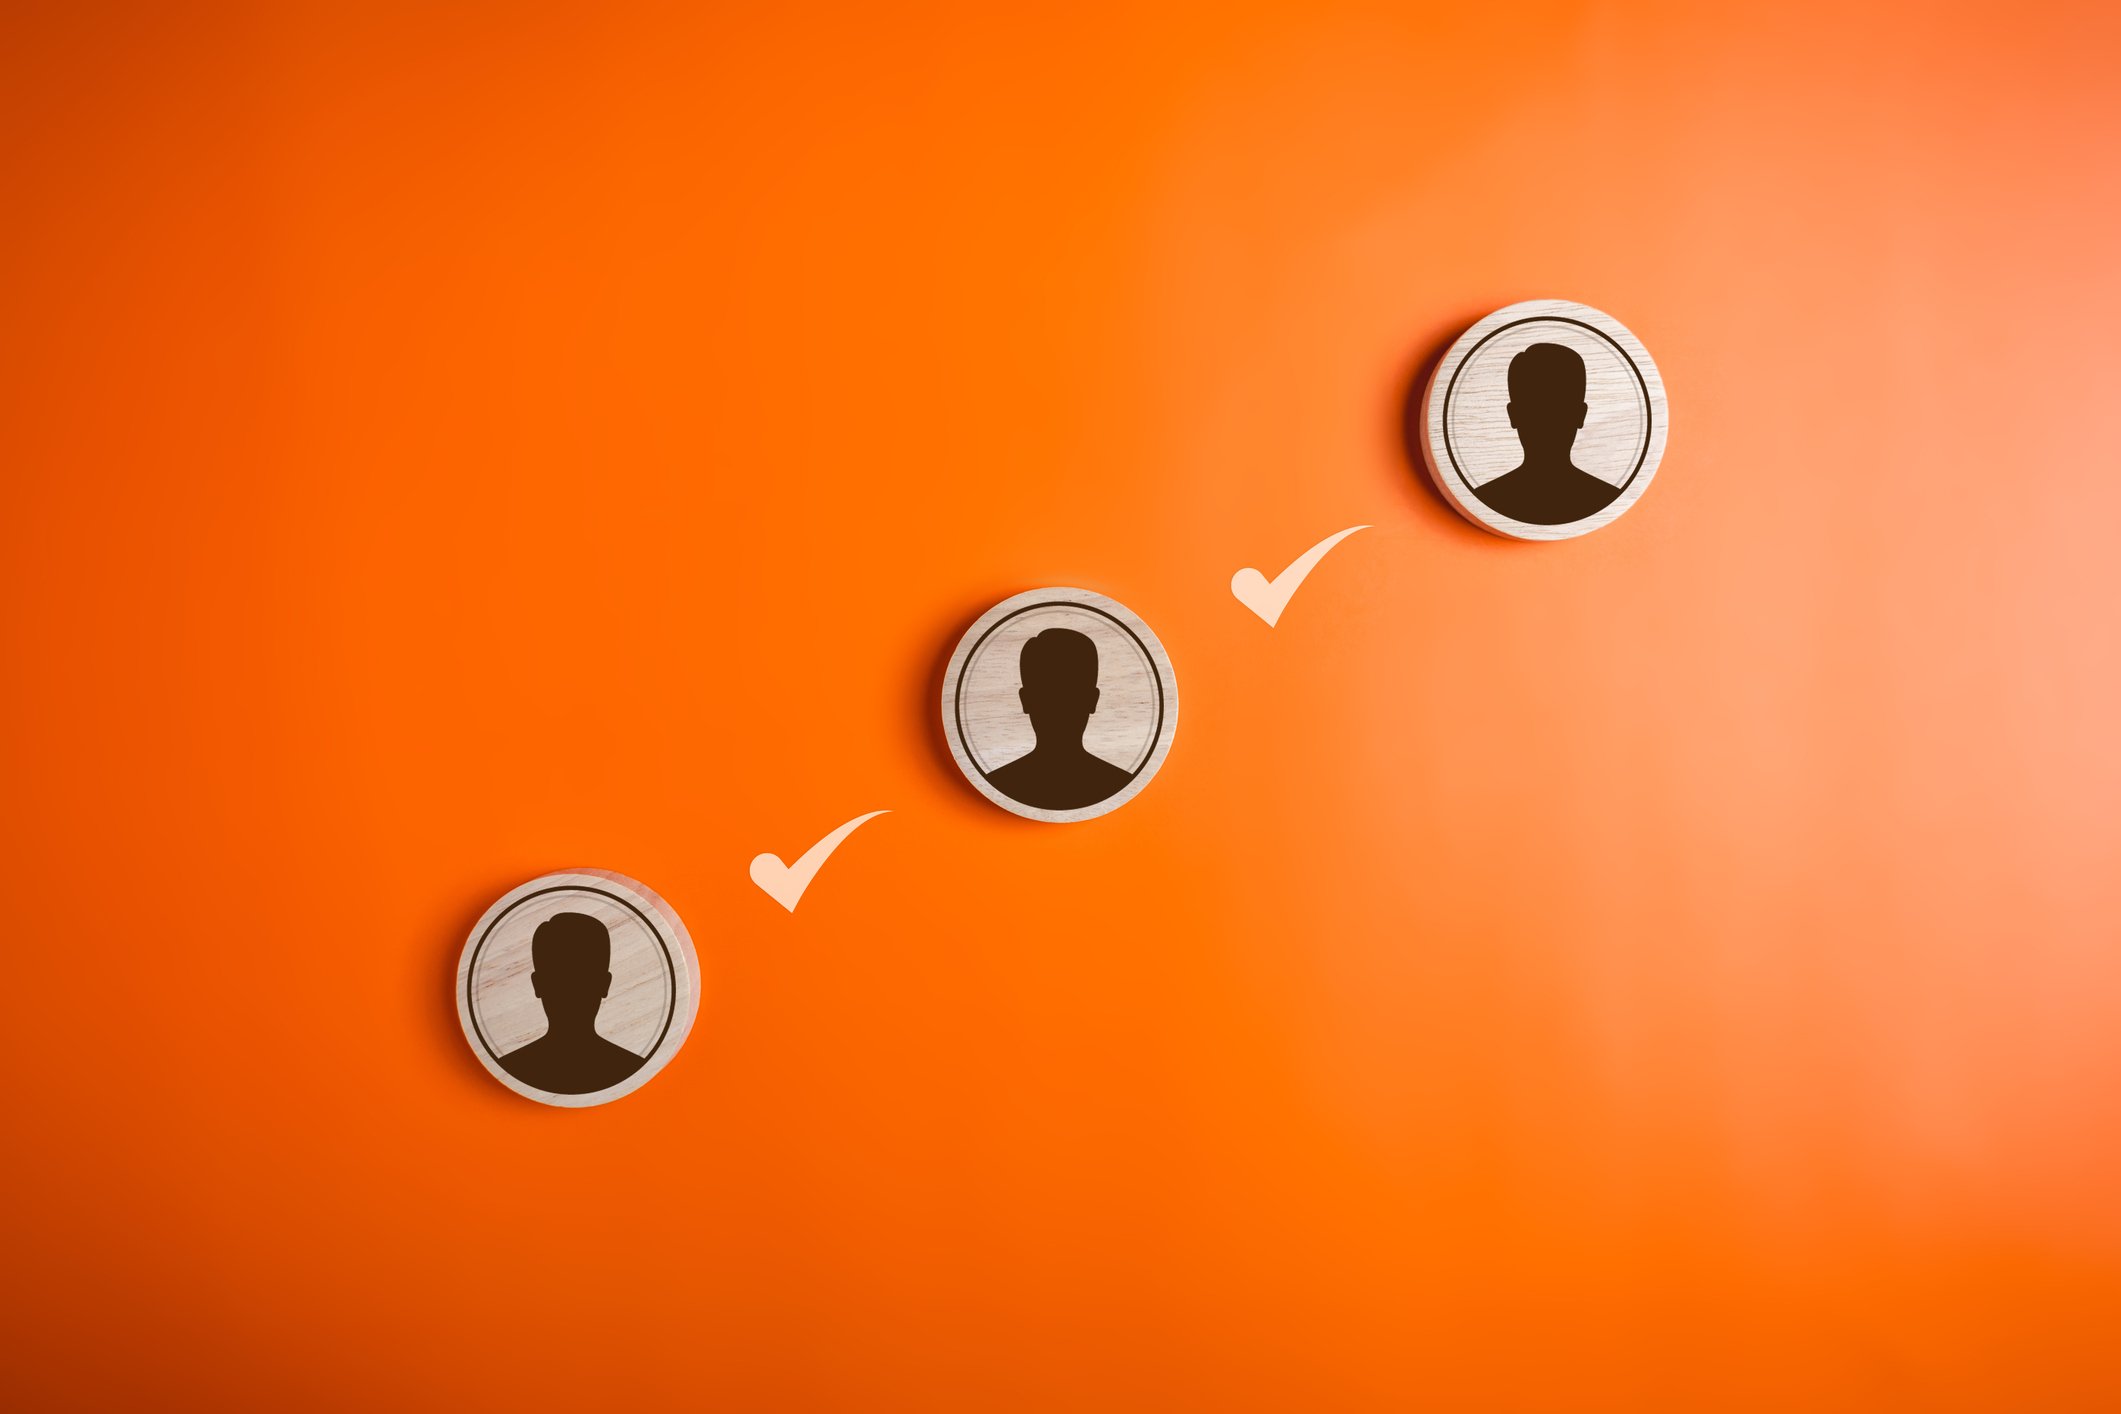 Graphic of three faceless profiles aimed diagonally to the right with two check marks in between them Orange background